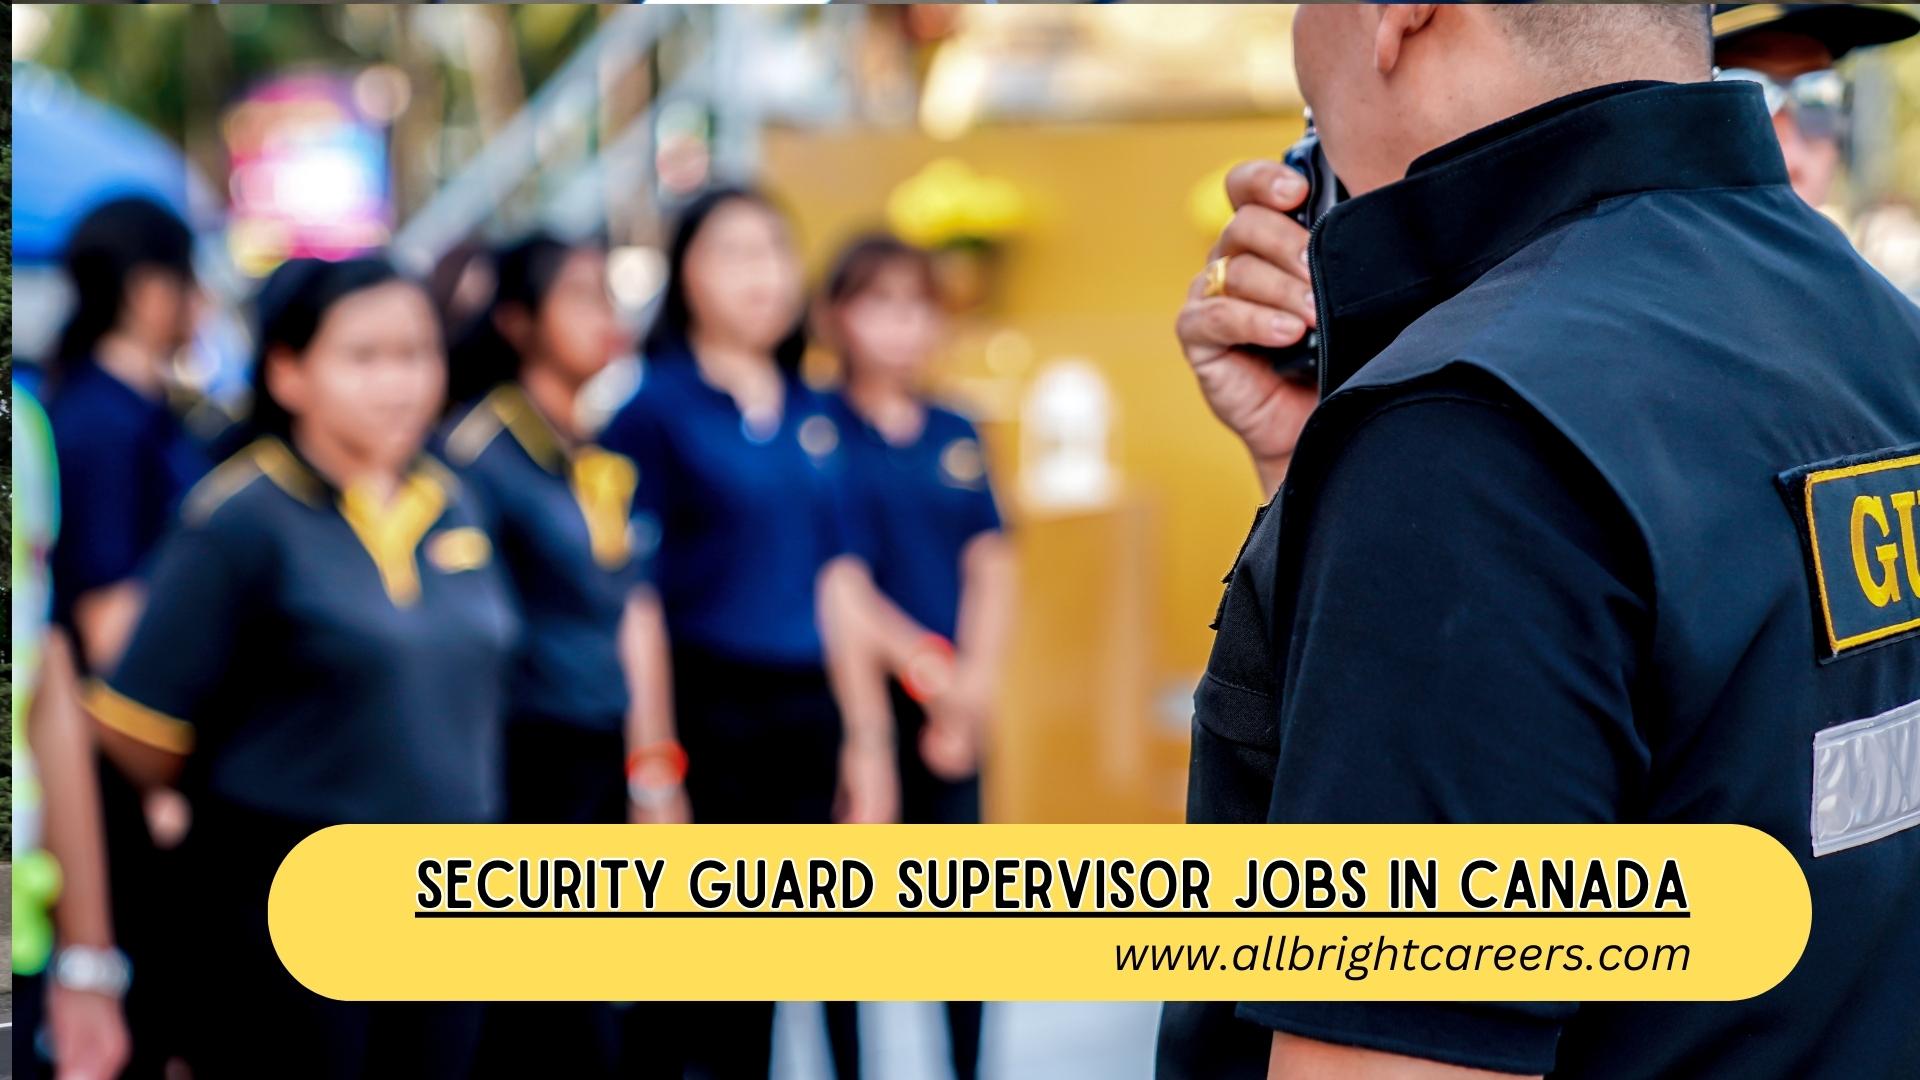 Security Guard Supervisor Jobs in Canada